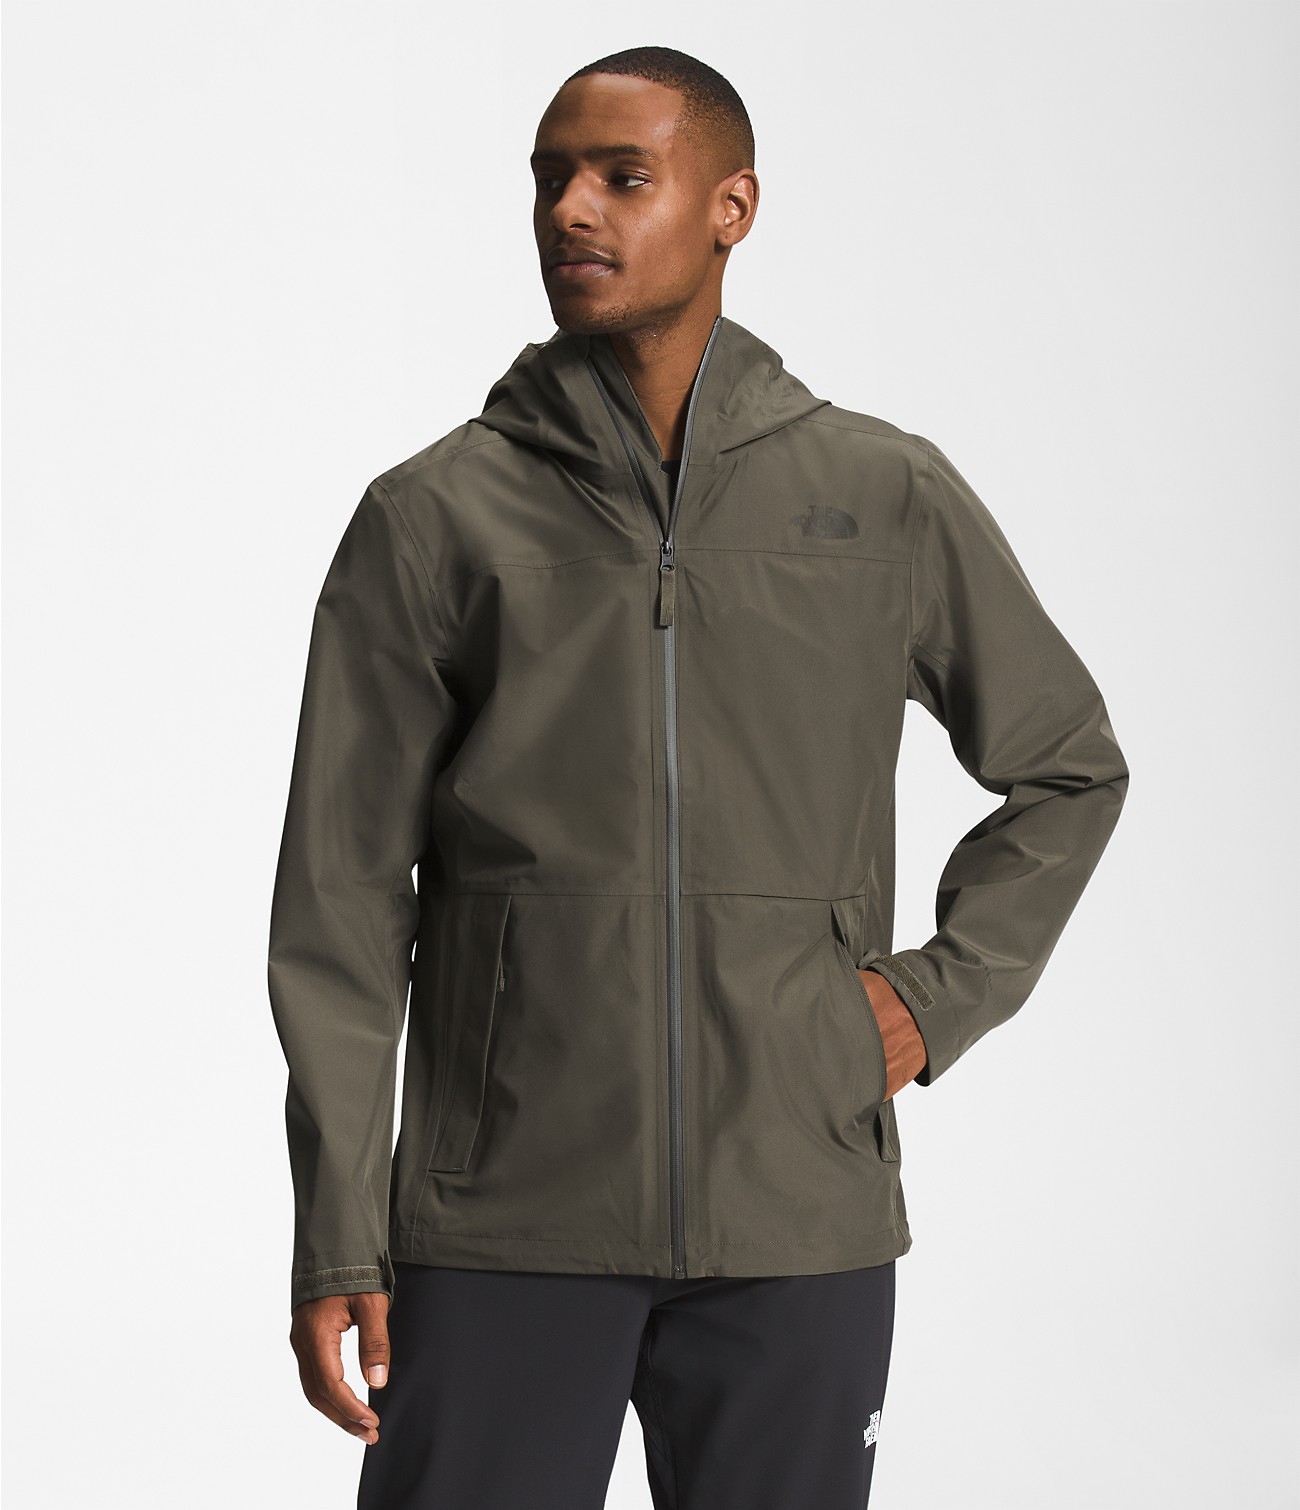 Unlock Wilderness' choice in the Black Diamond Vs North Face comparison, the Dryzzle FUTURELIGHT™ Jacket by The North Face